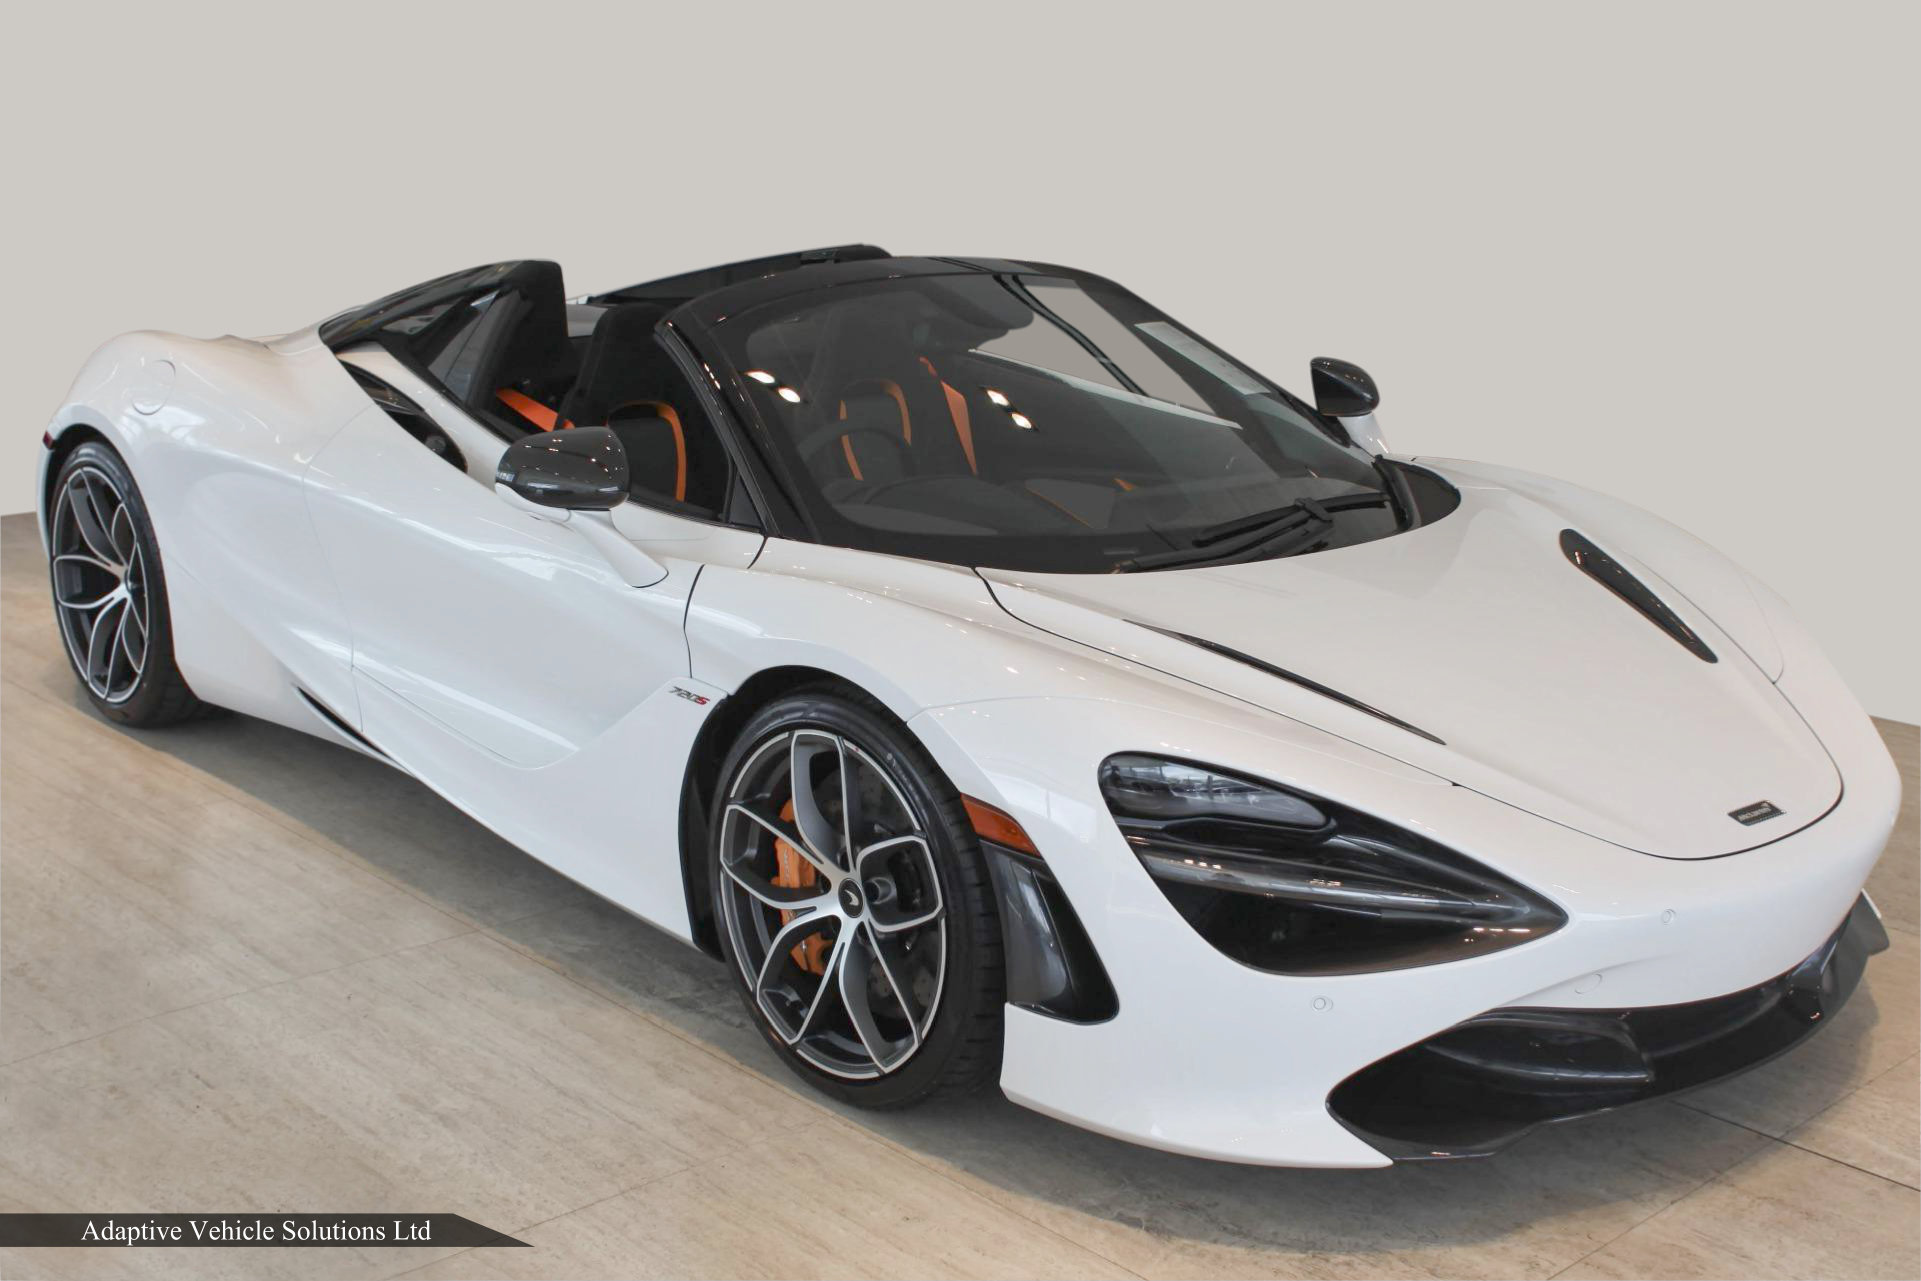 2021 McLaren 720s Spider Pearl White off side front view